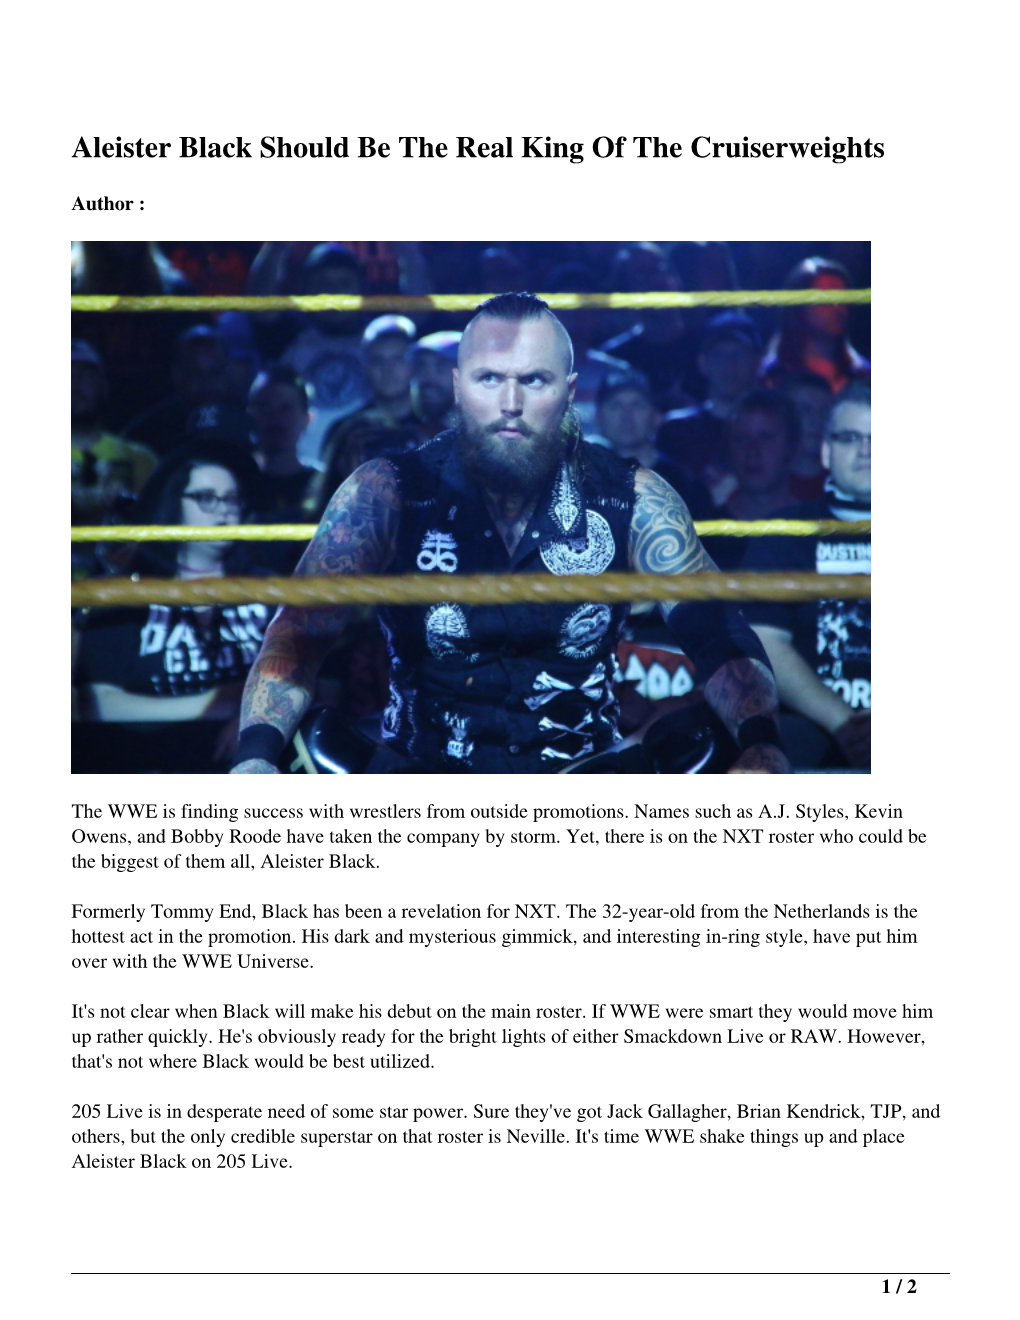 Aleister Black Should Be the Real King of the Cruiserweights